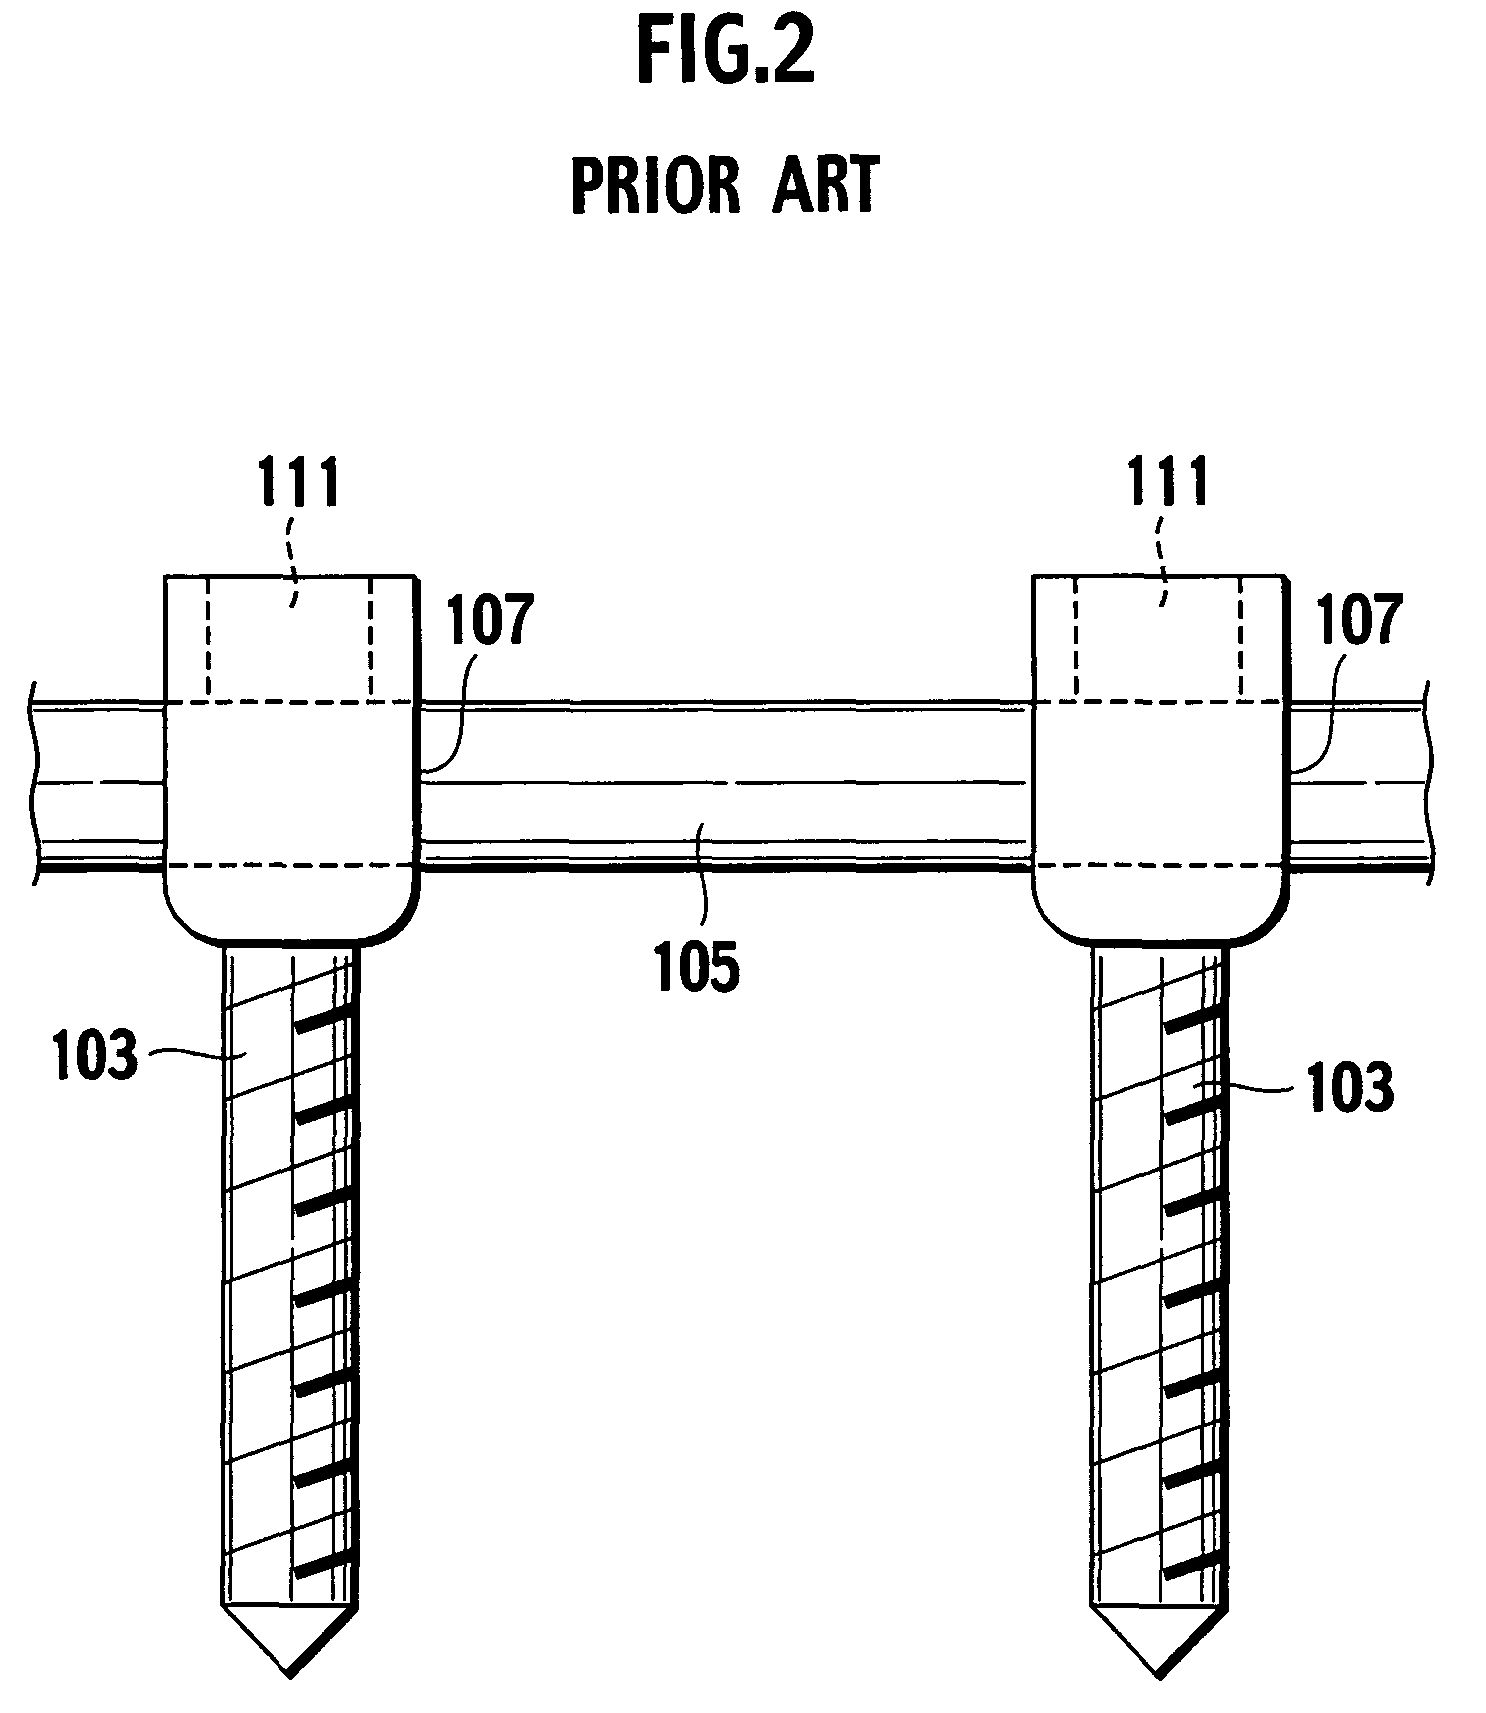 Auxiliary instrument for fixing rod